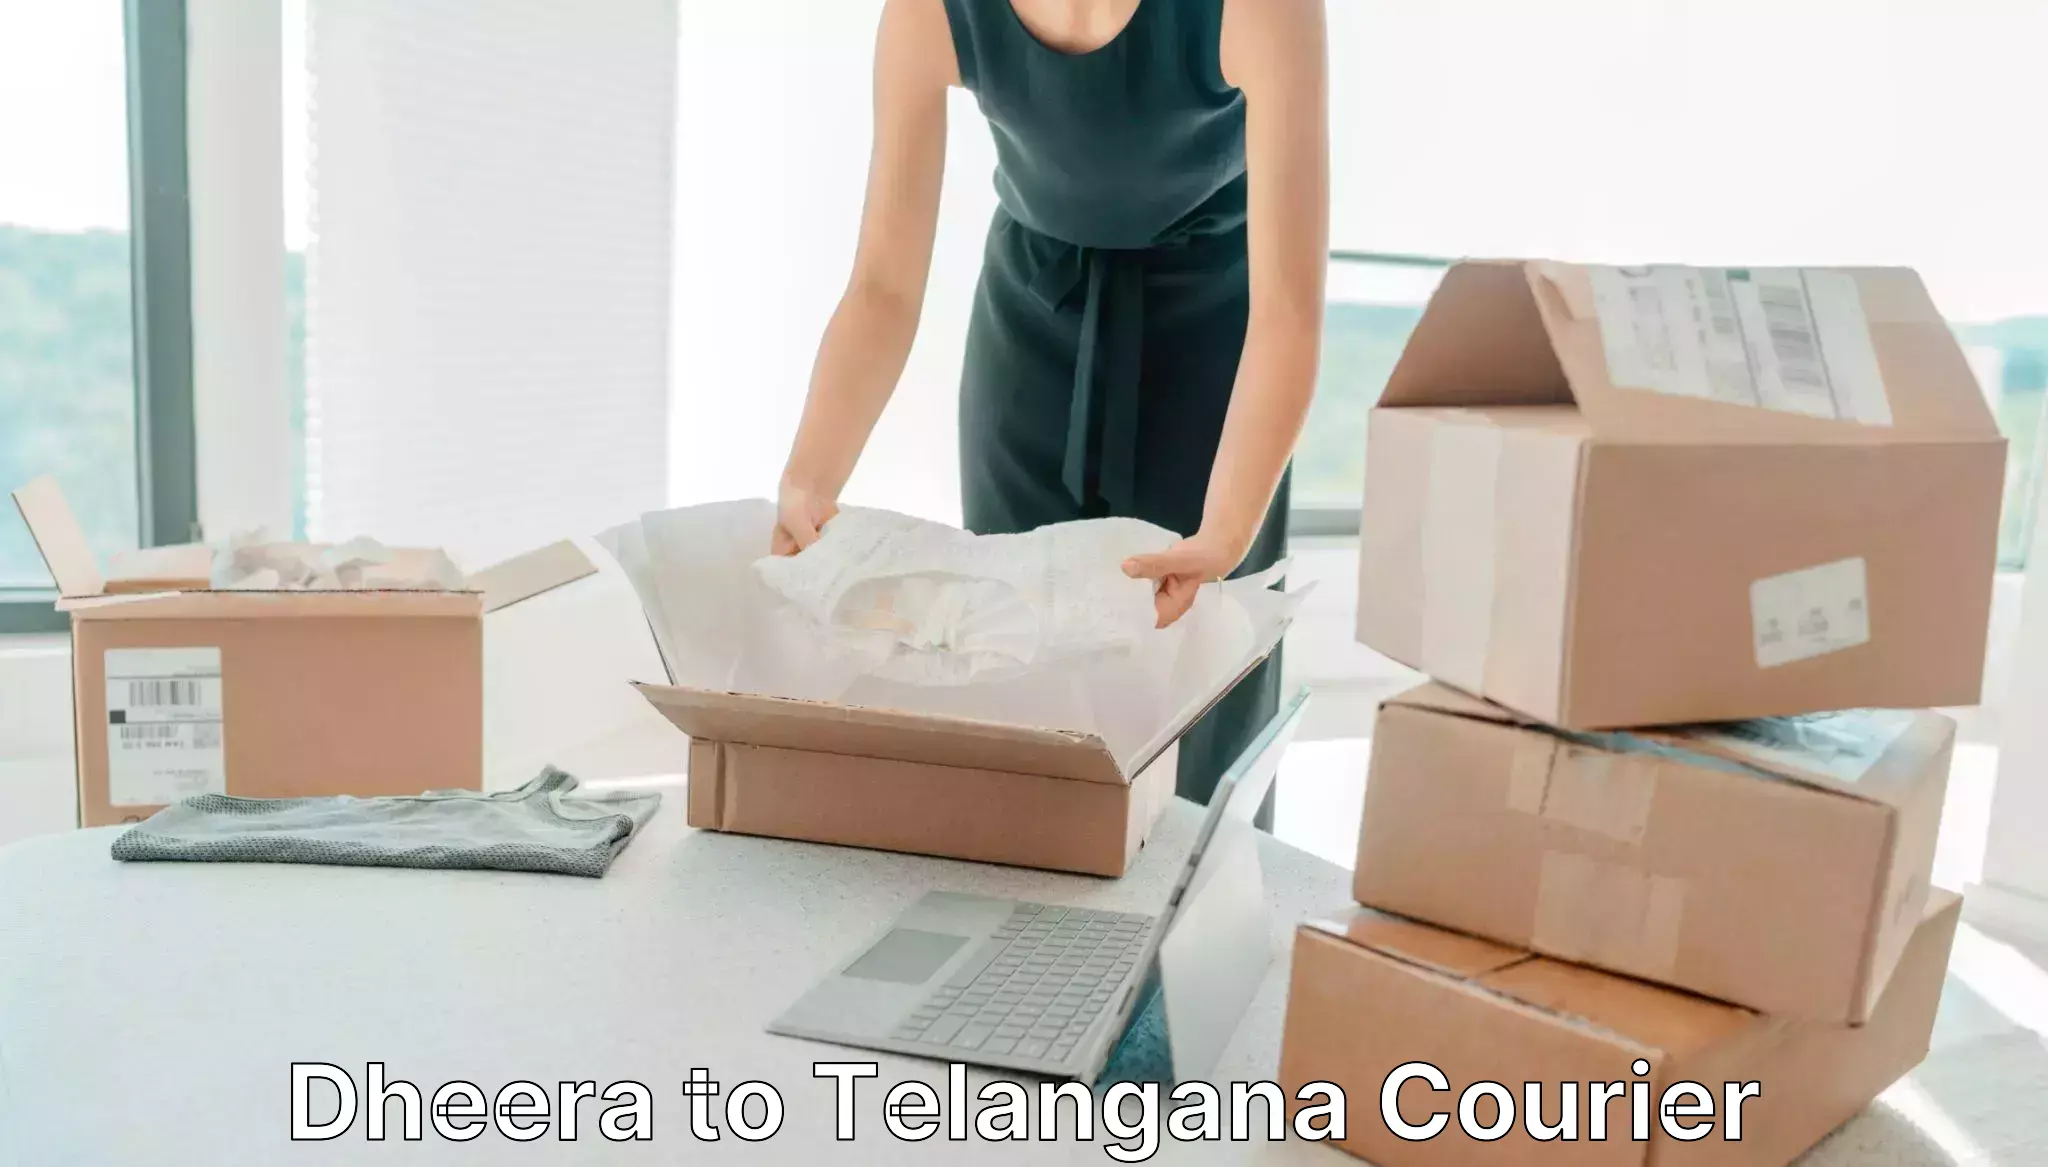 Residential courier service Dheera to Secunderabad